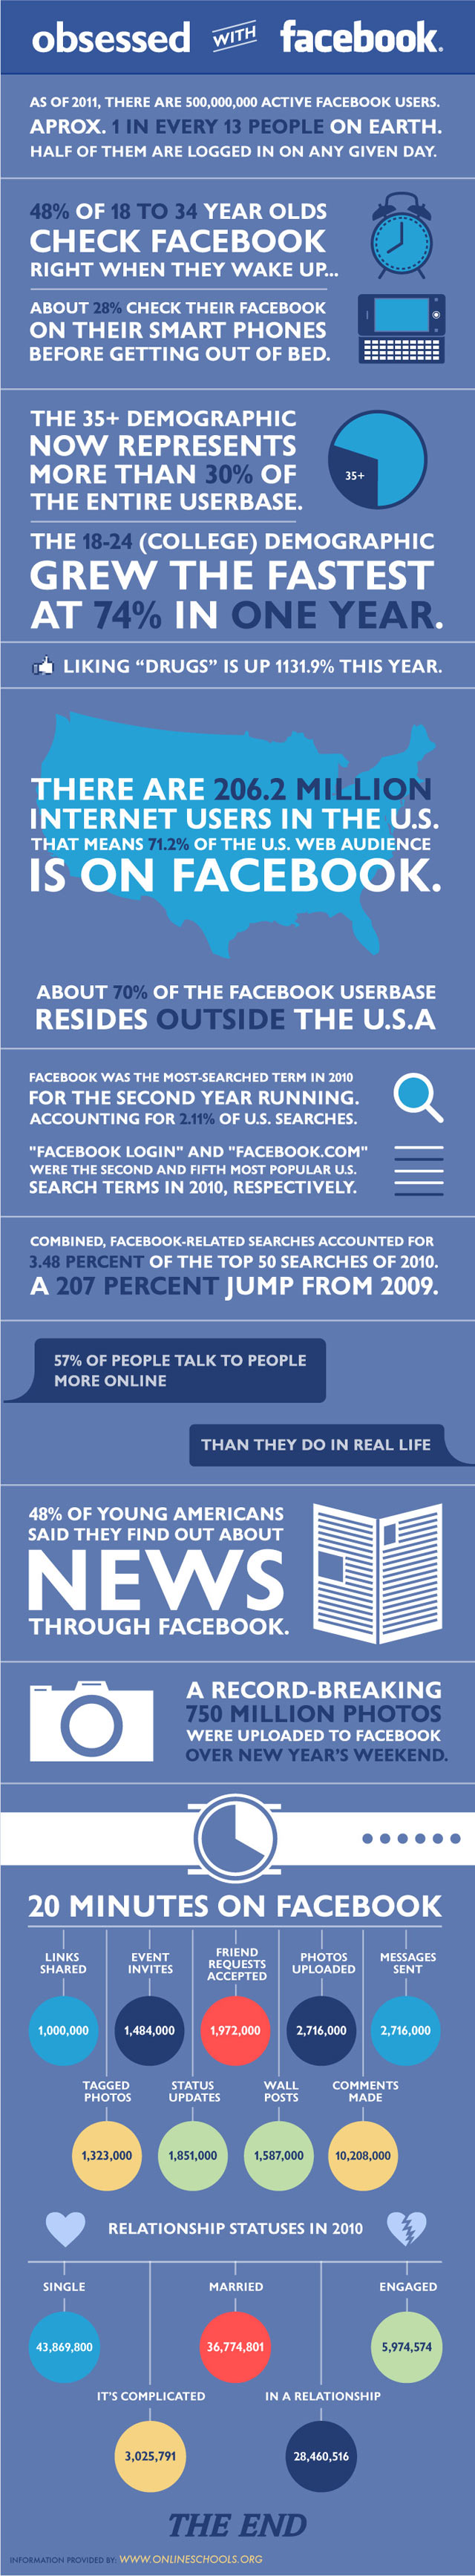 Obsessed with Facebook Infographic